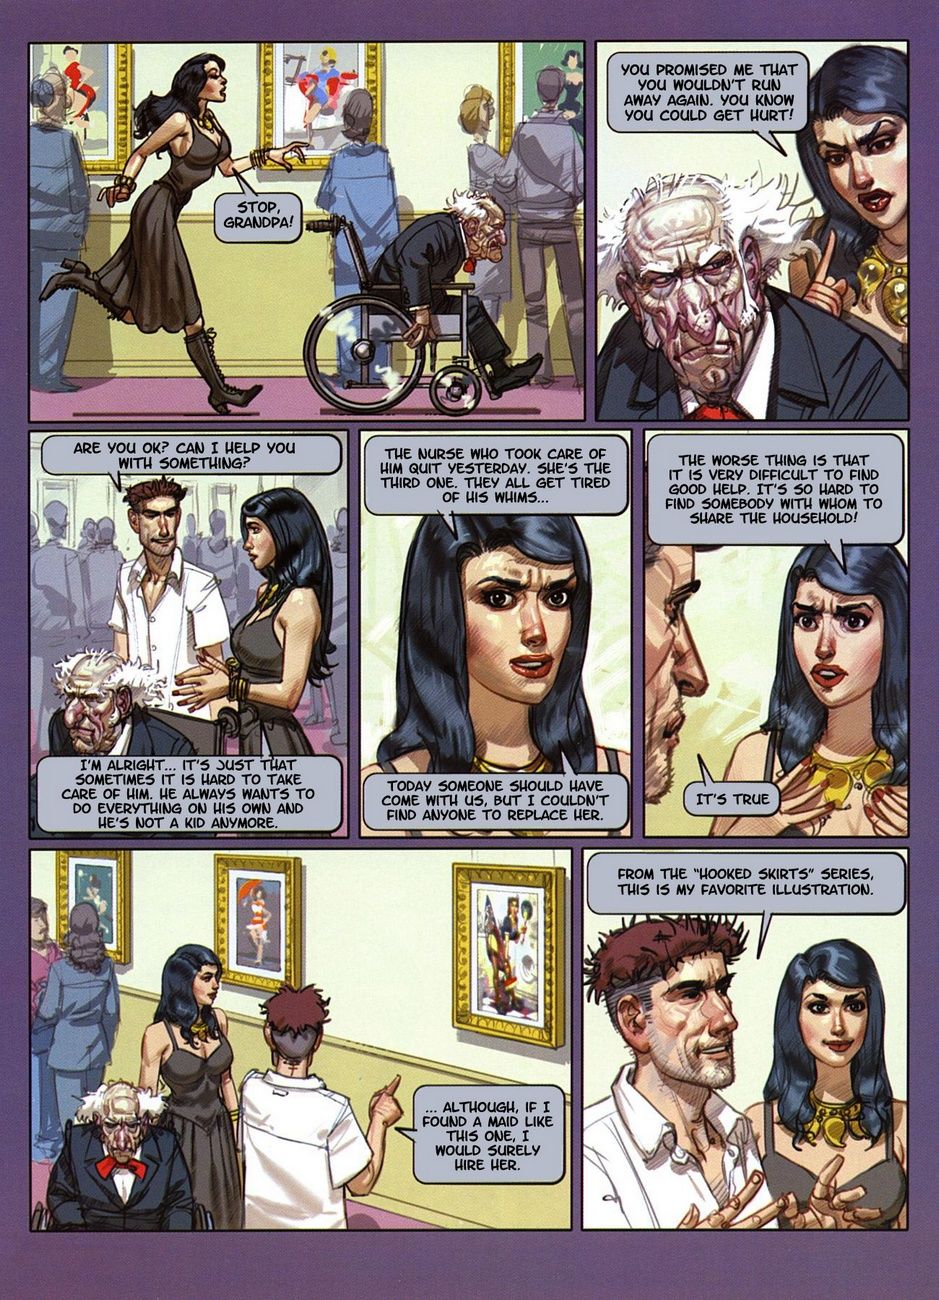 Exhibition 2 - The Indiscreet Broom page 3